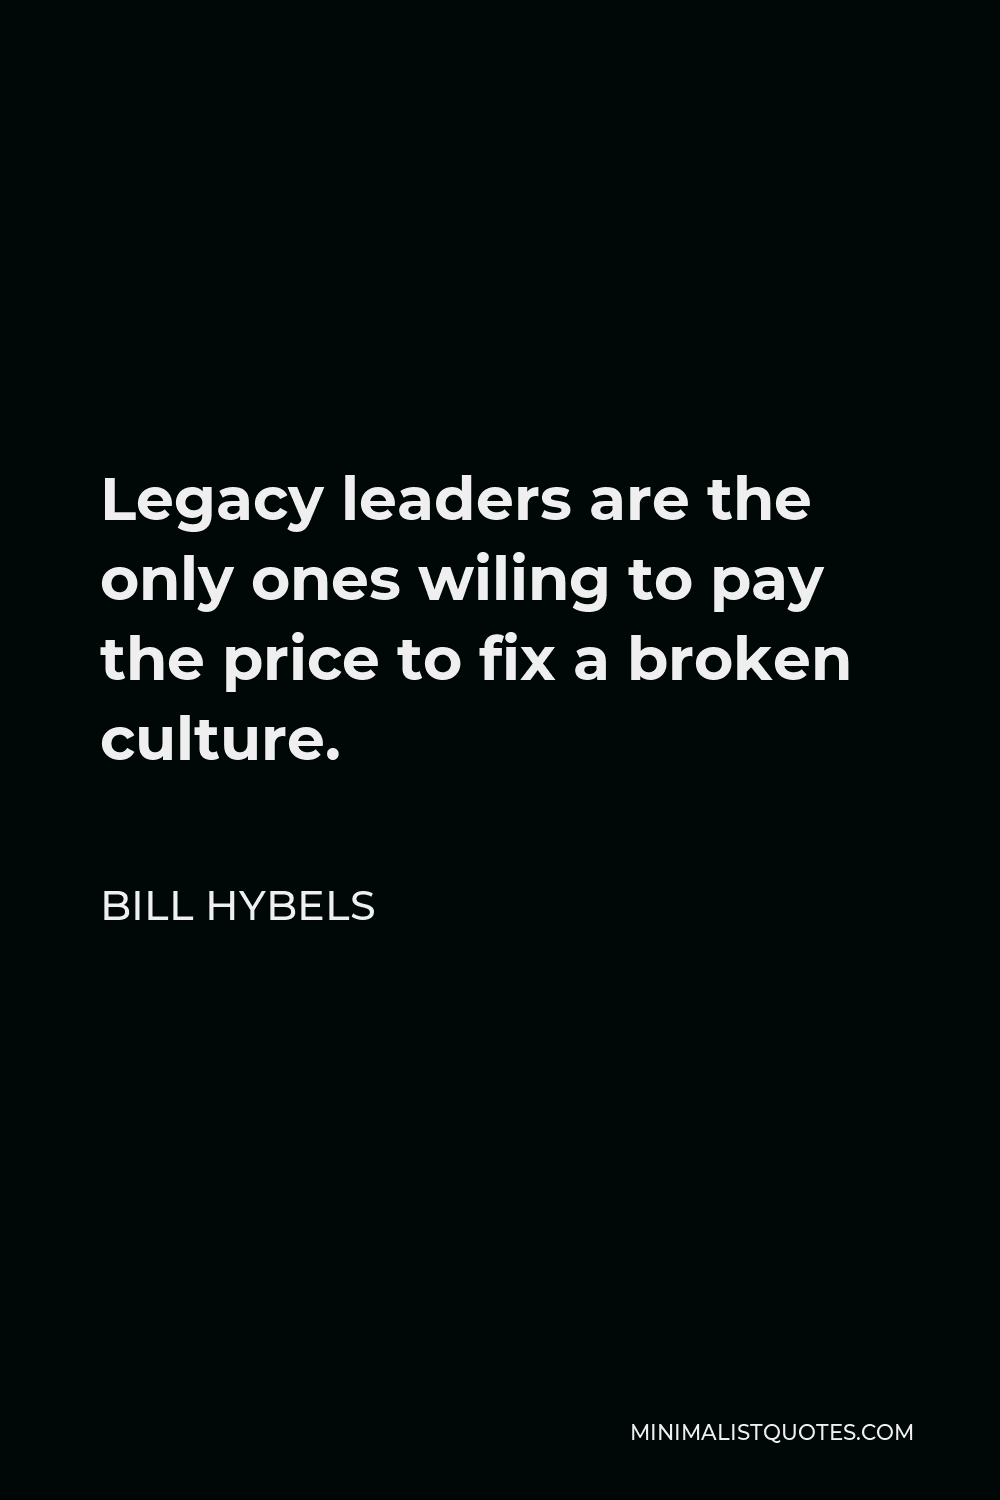 Bill Hybels Quote - Legacy leaders are the only ones wiling to pay the price to fix a broken culture.